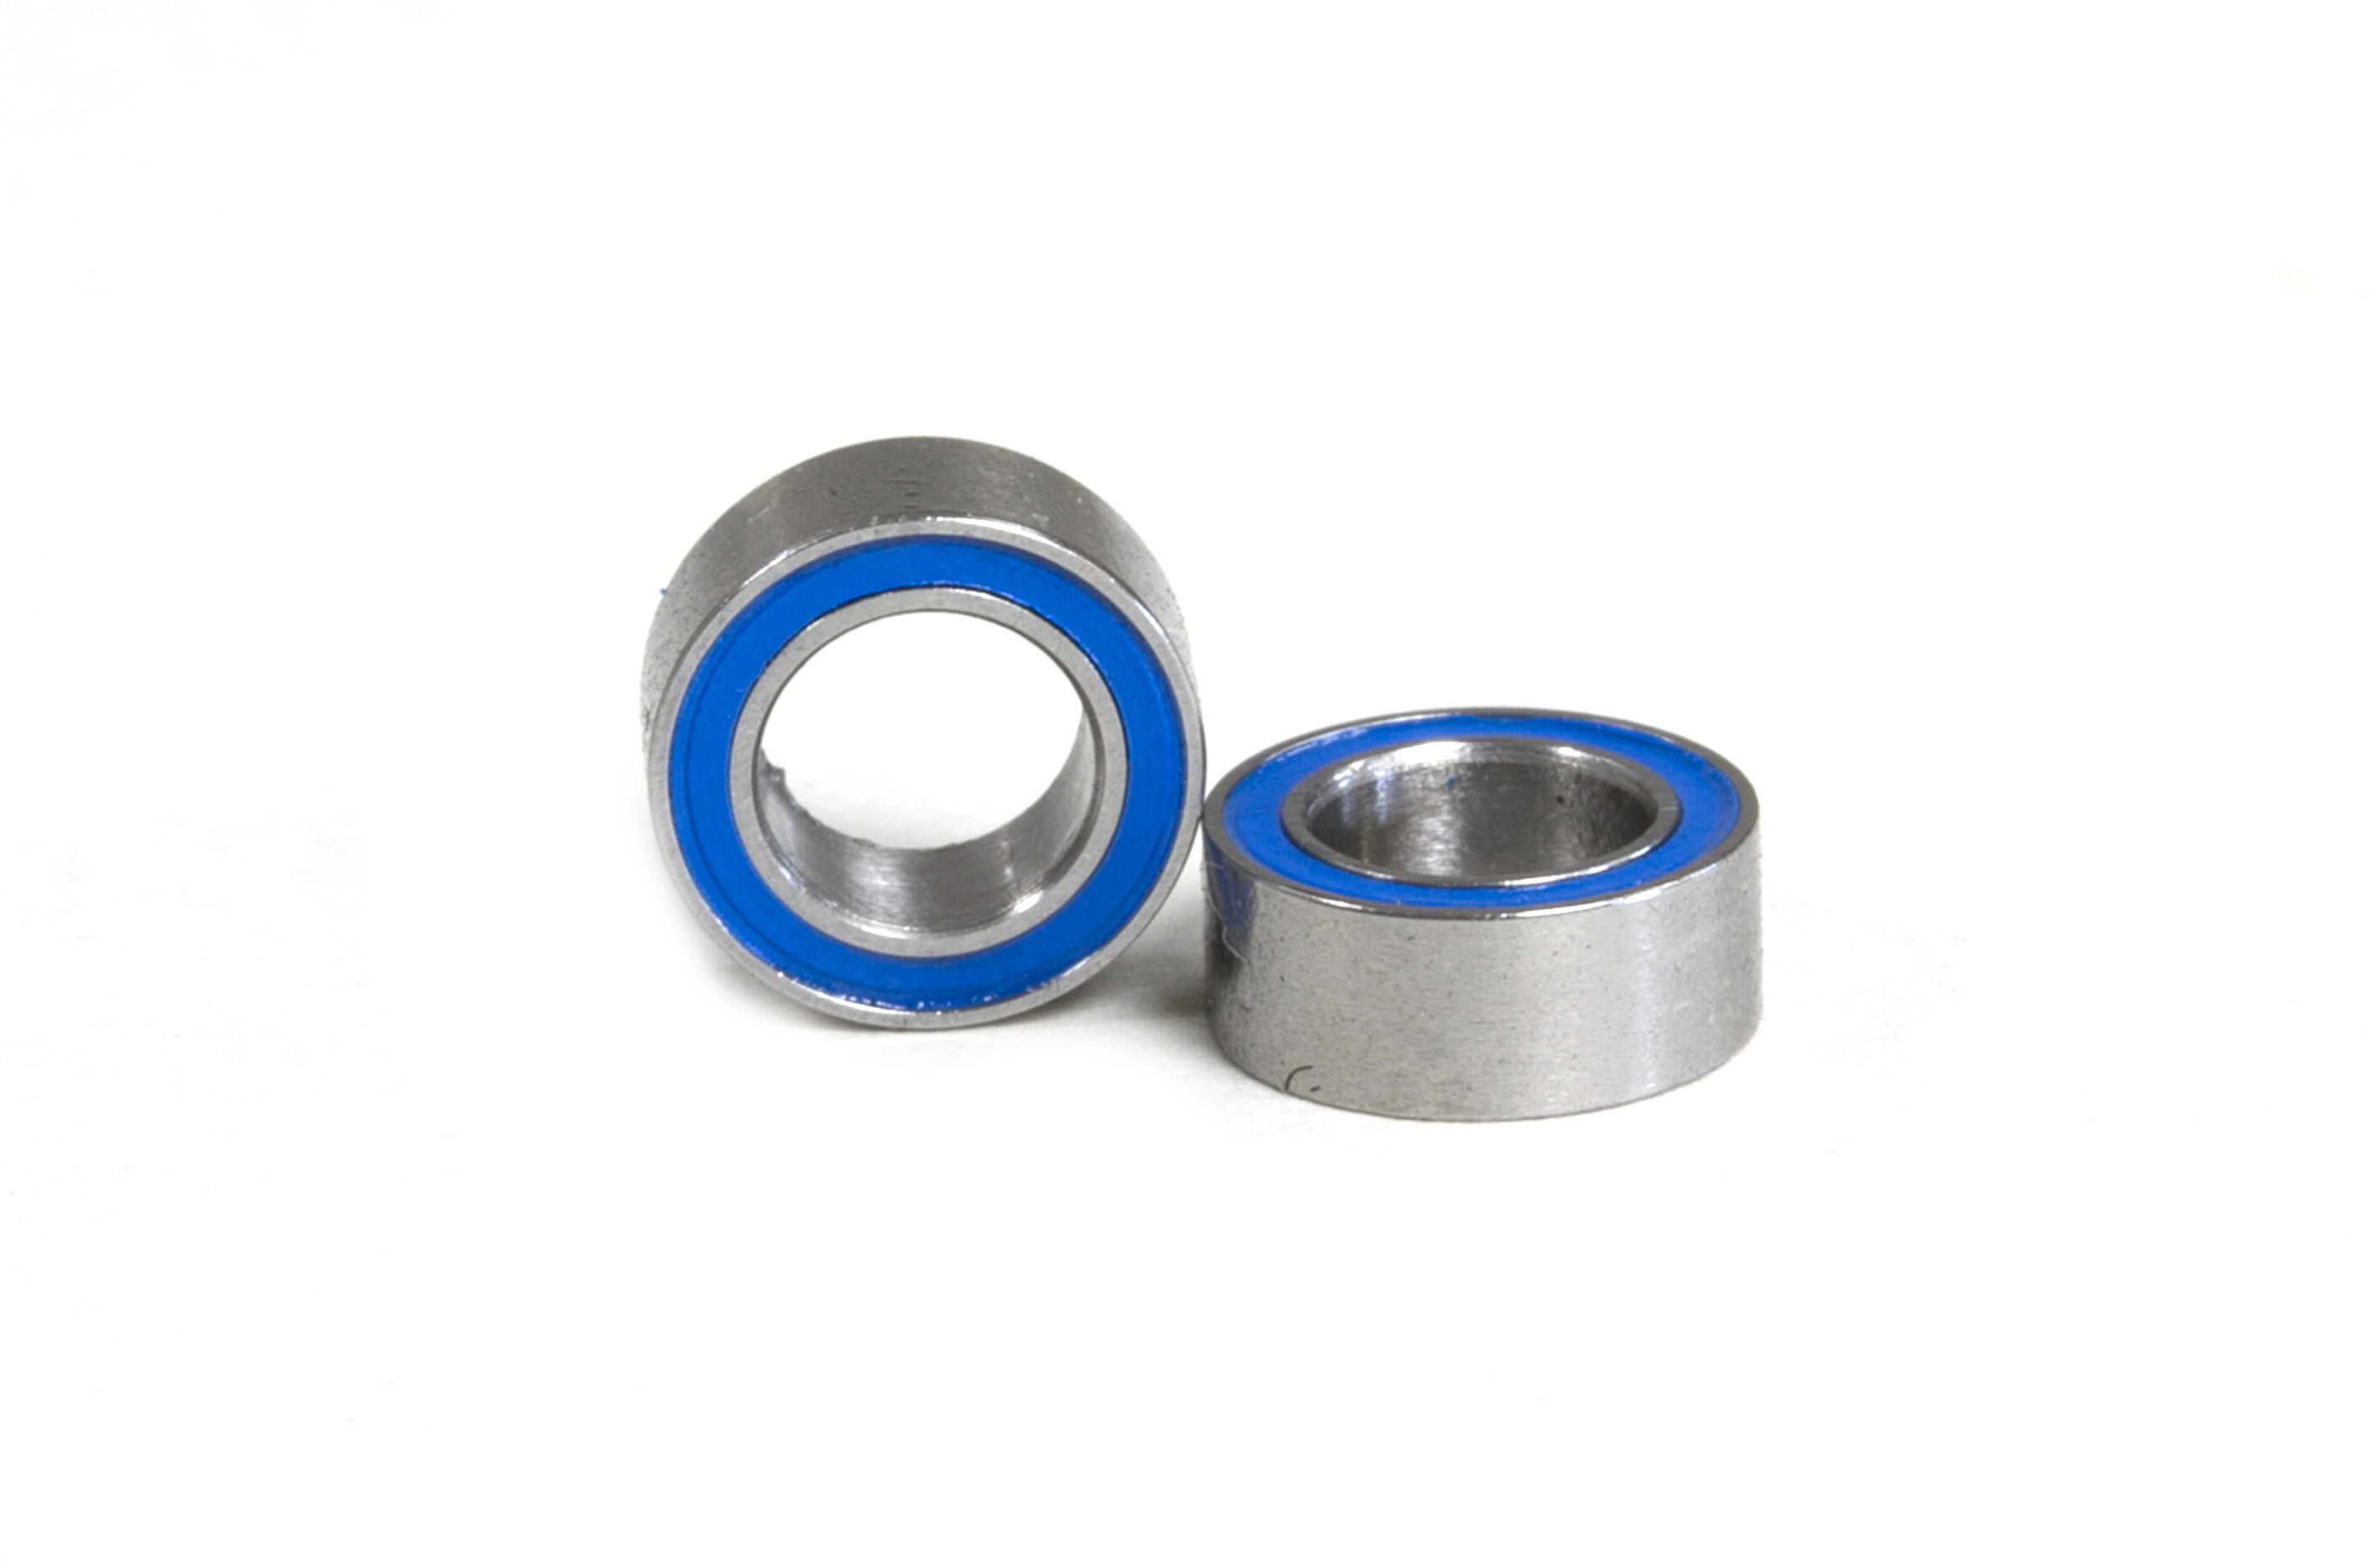 y0037/01 Ball bearings, sealed type 2RS (3/16"x5/16"x1/8")